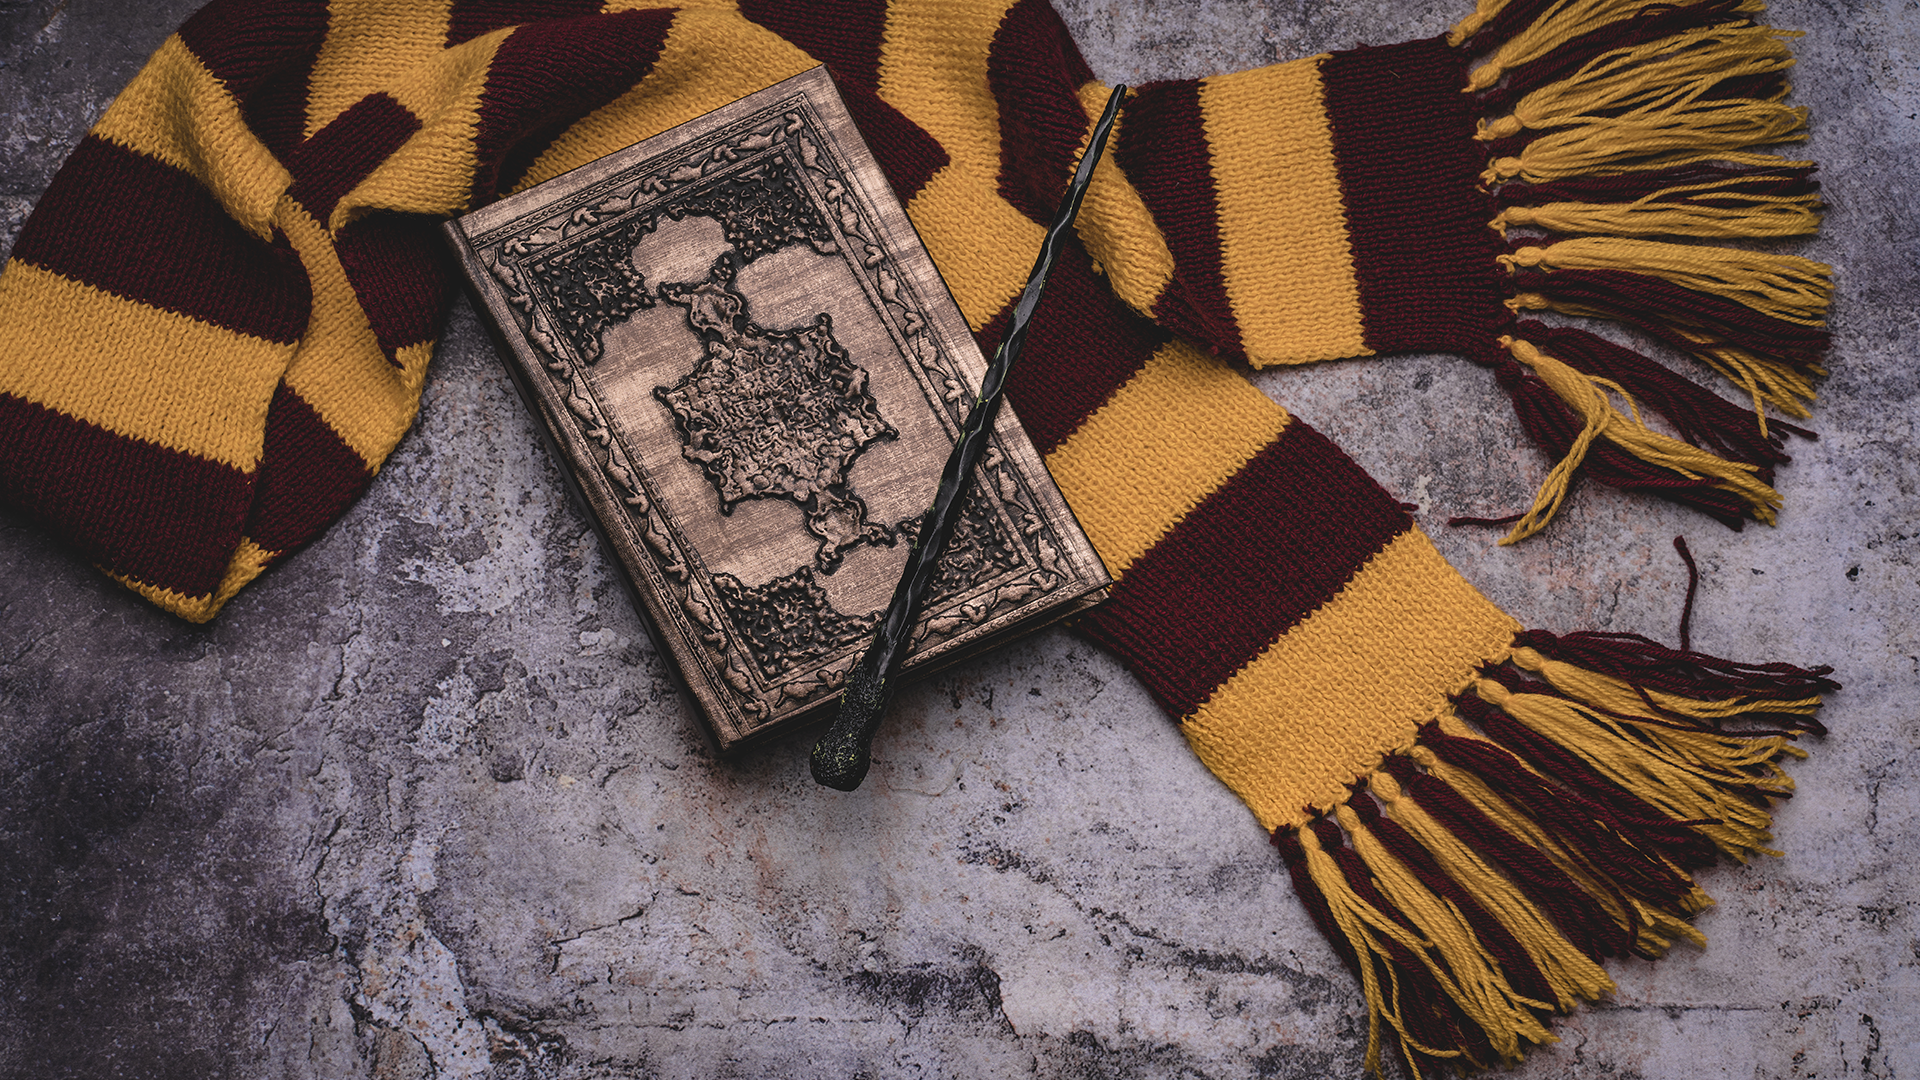 Scarf, wand, and spell book